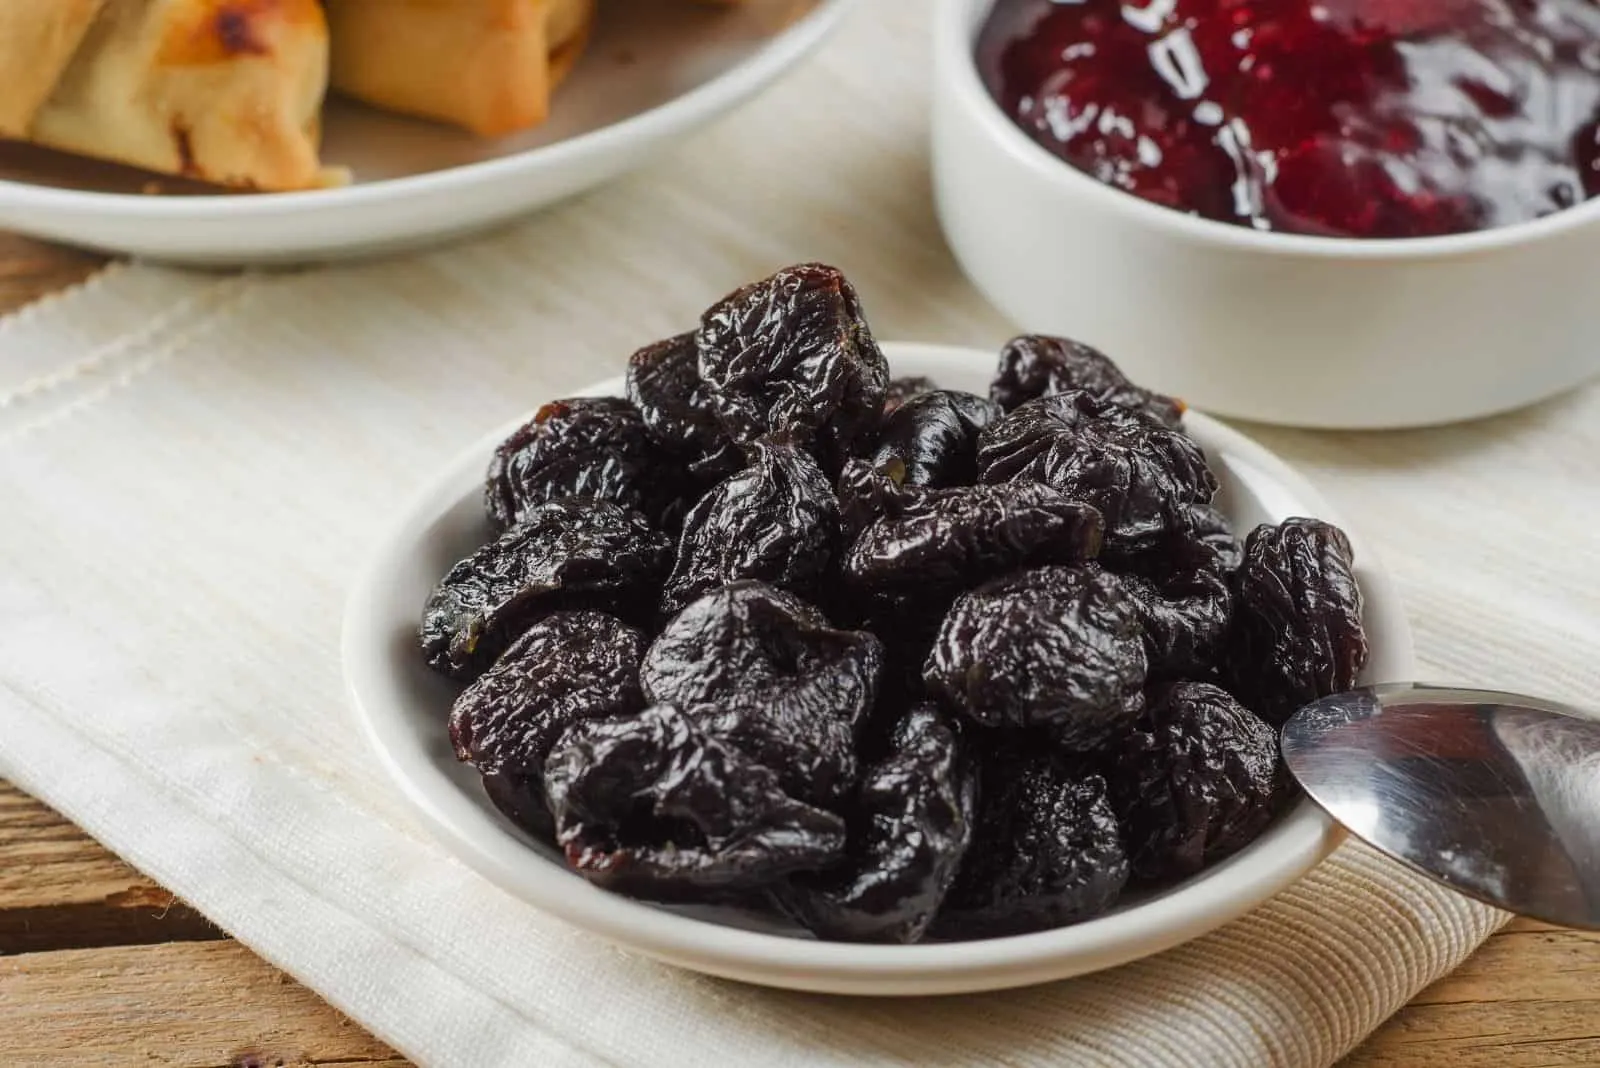 prunes in small plate and jam beside on the table